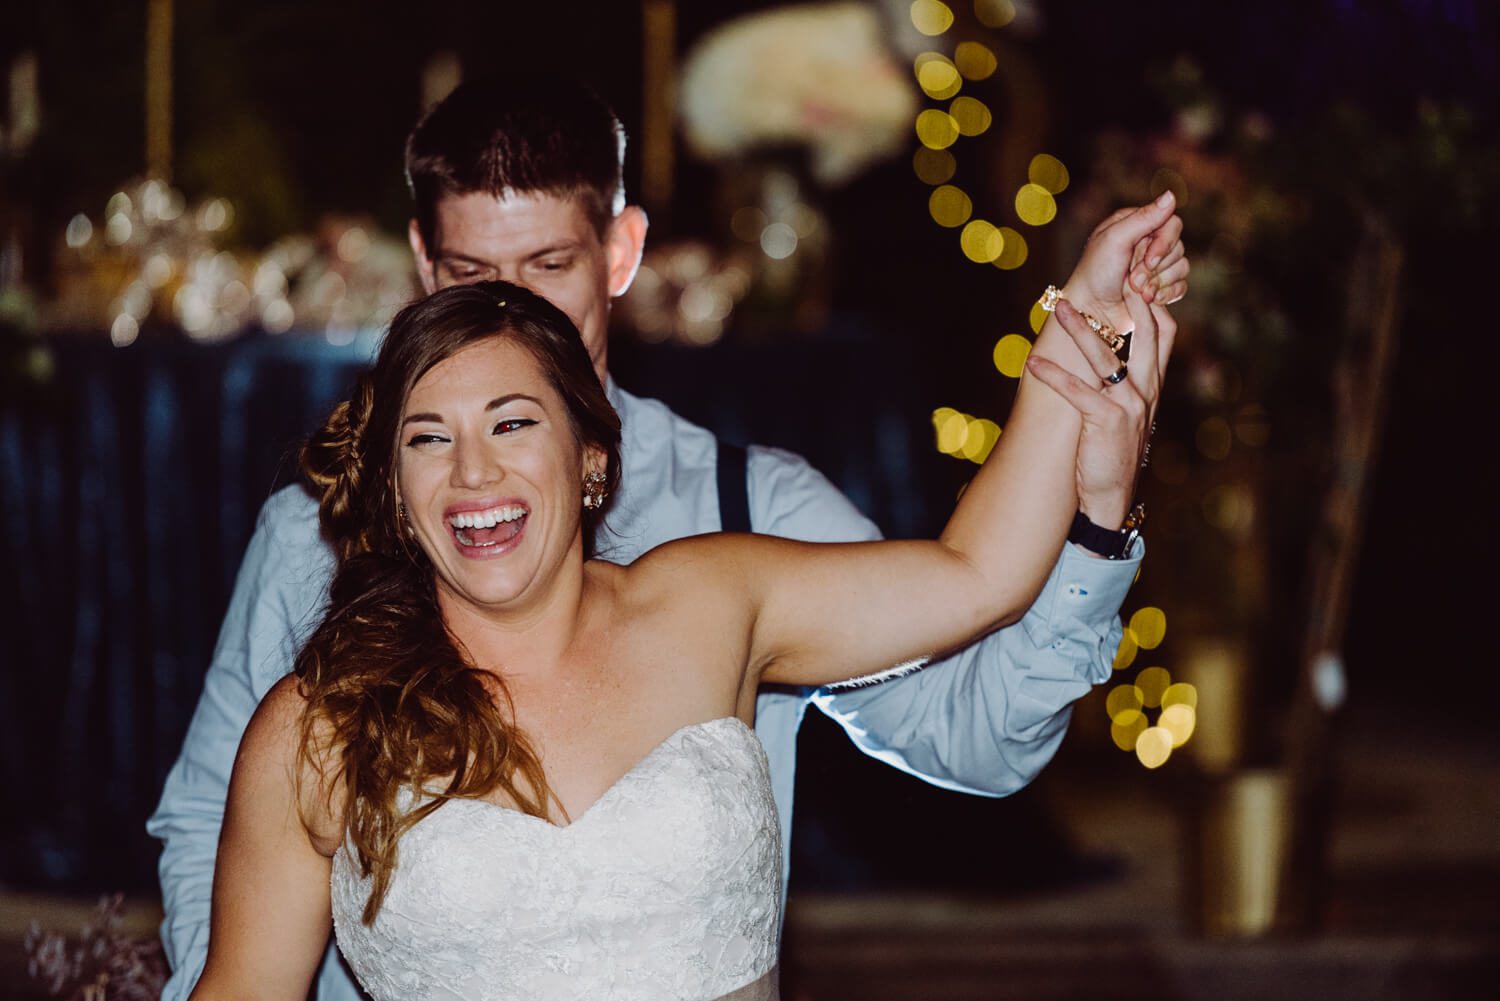 A Key West bride and groom dancing at their wedding reception, captured by Freas Photography.